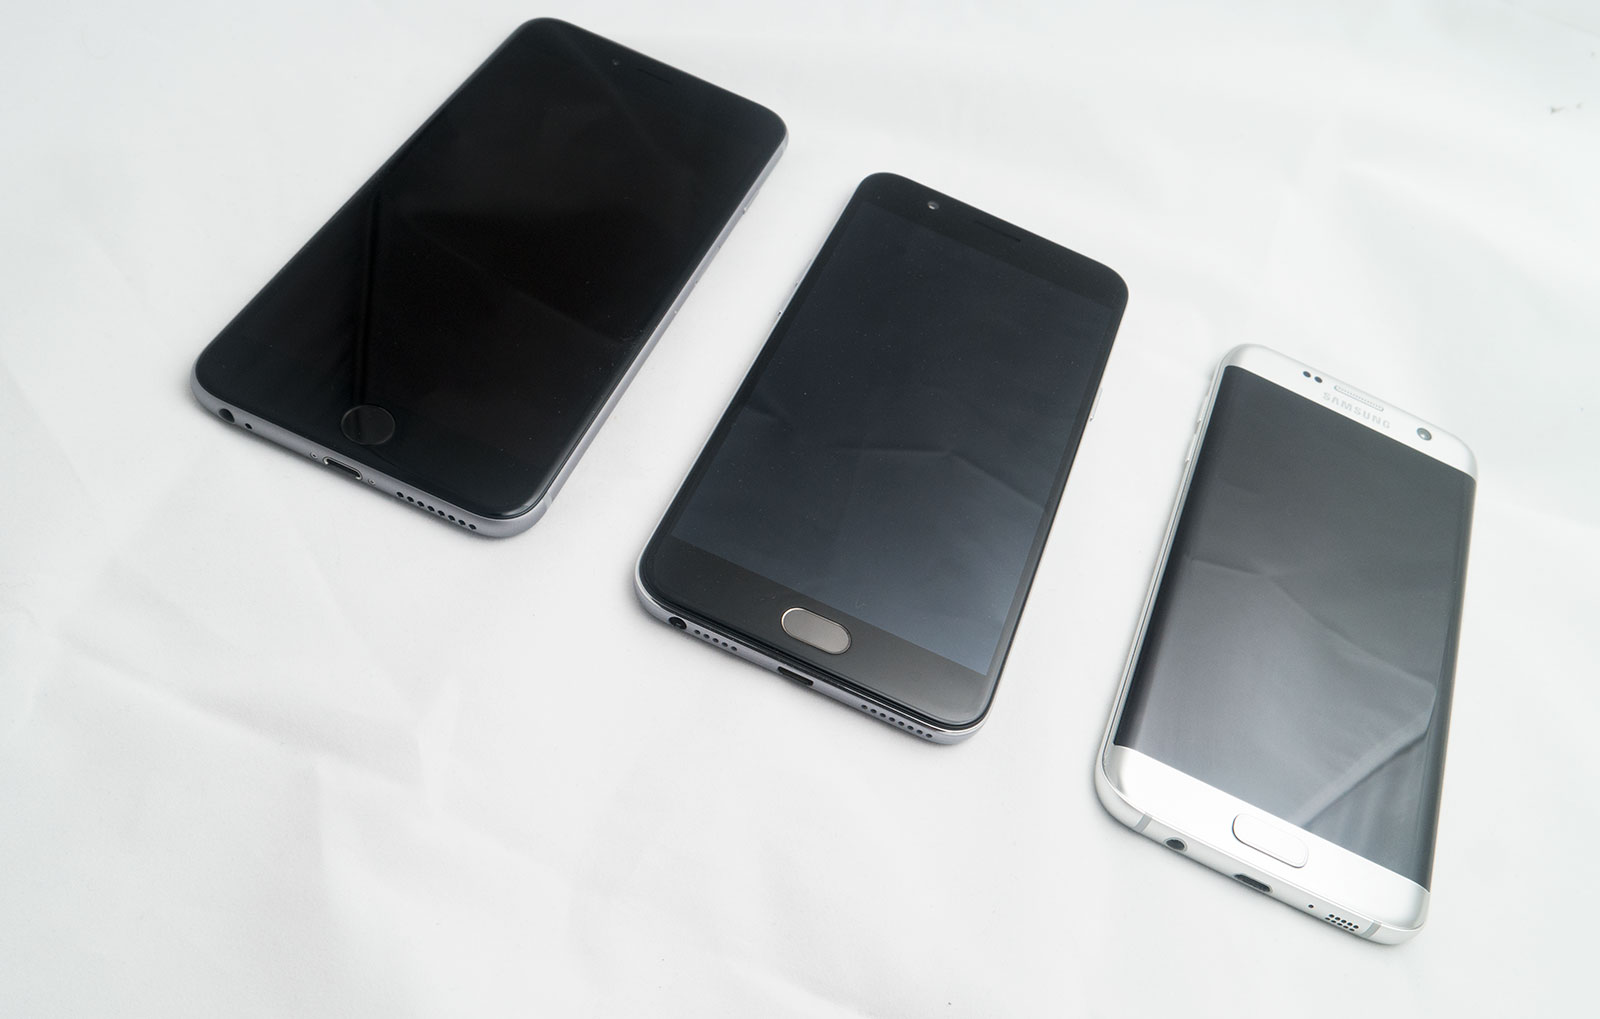 iPhone 6s Plus on the left, Oppo F1s in the middle, Samsung Galaxy S7 Edge on the right.